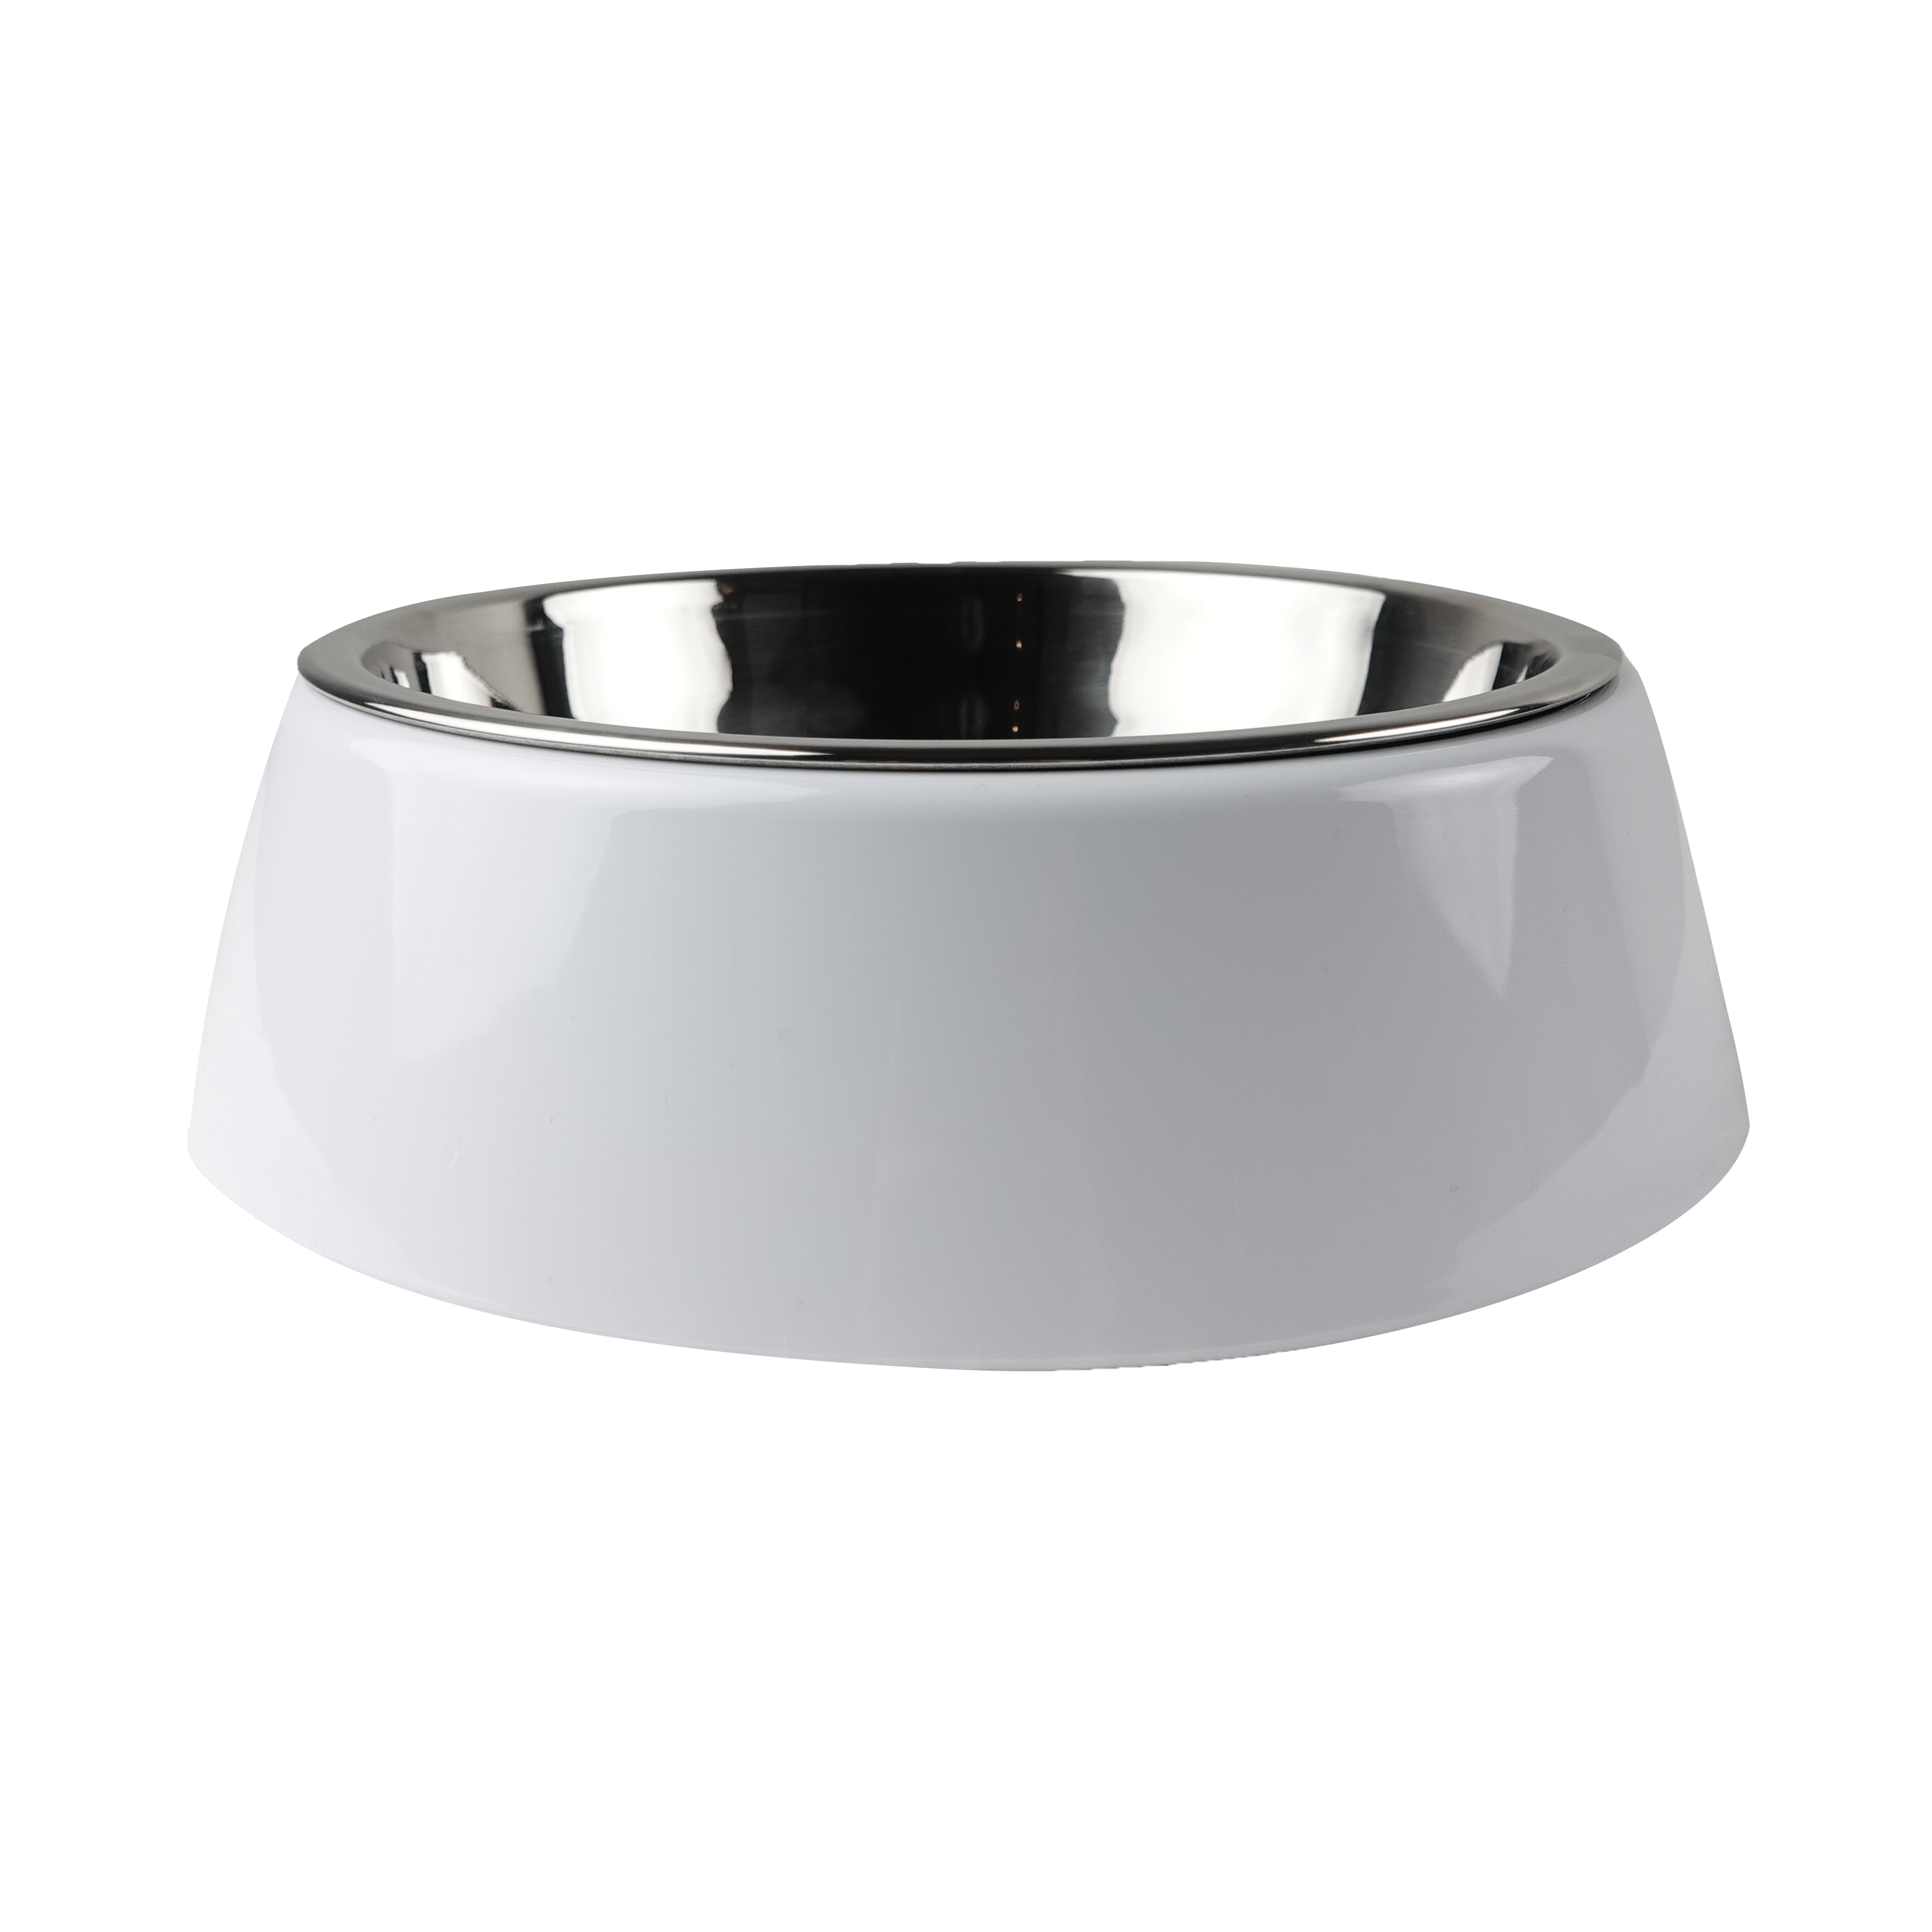 White food bowl for dogs with stainless steel inner bowl